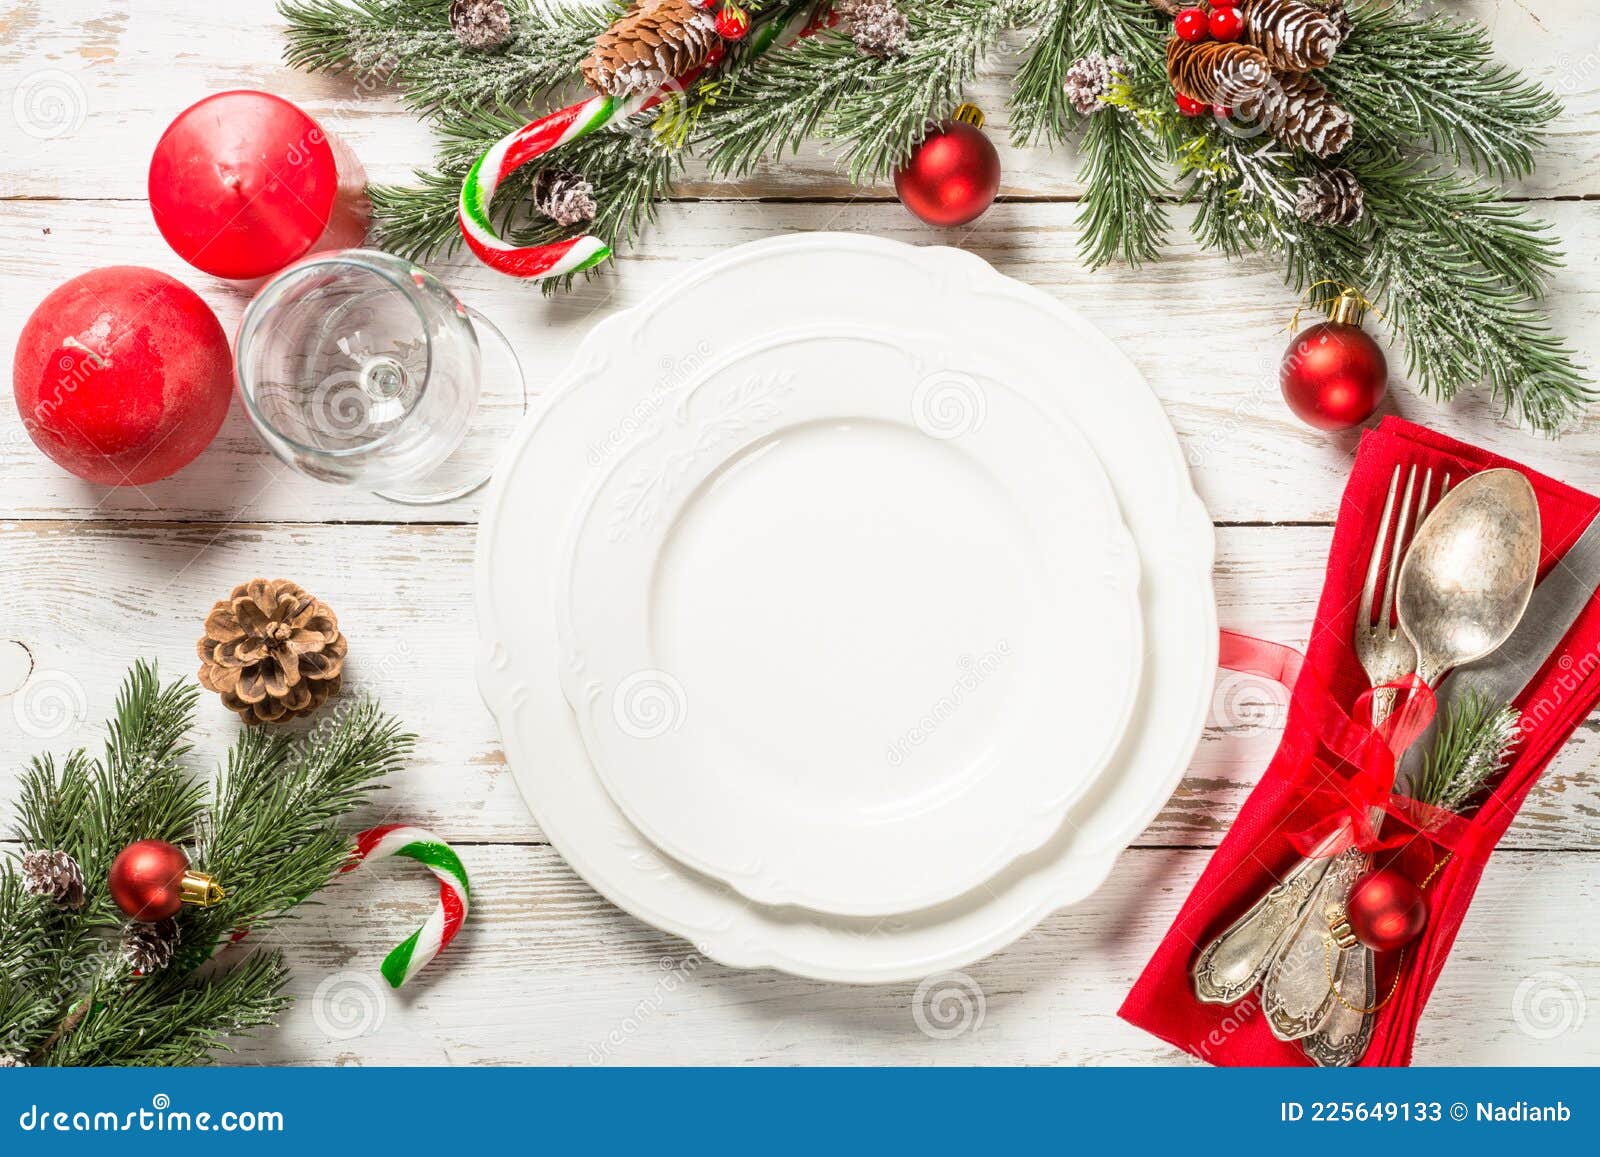 Christmas Table Setting with Holidays Decorations at White Wooden Table ...